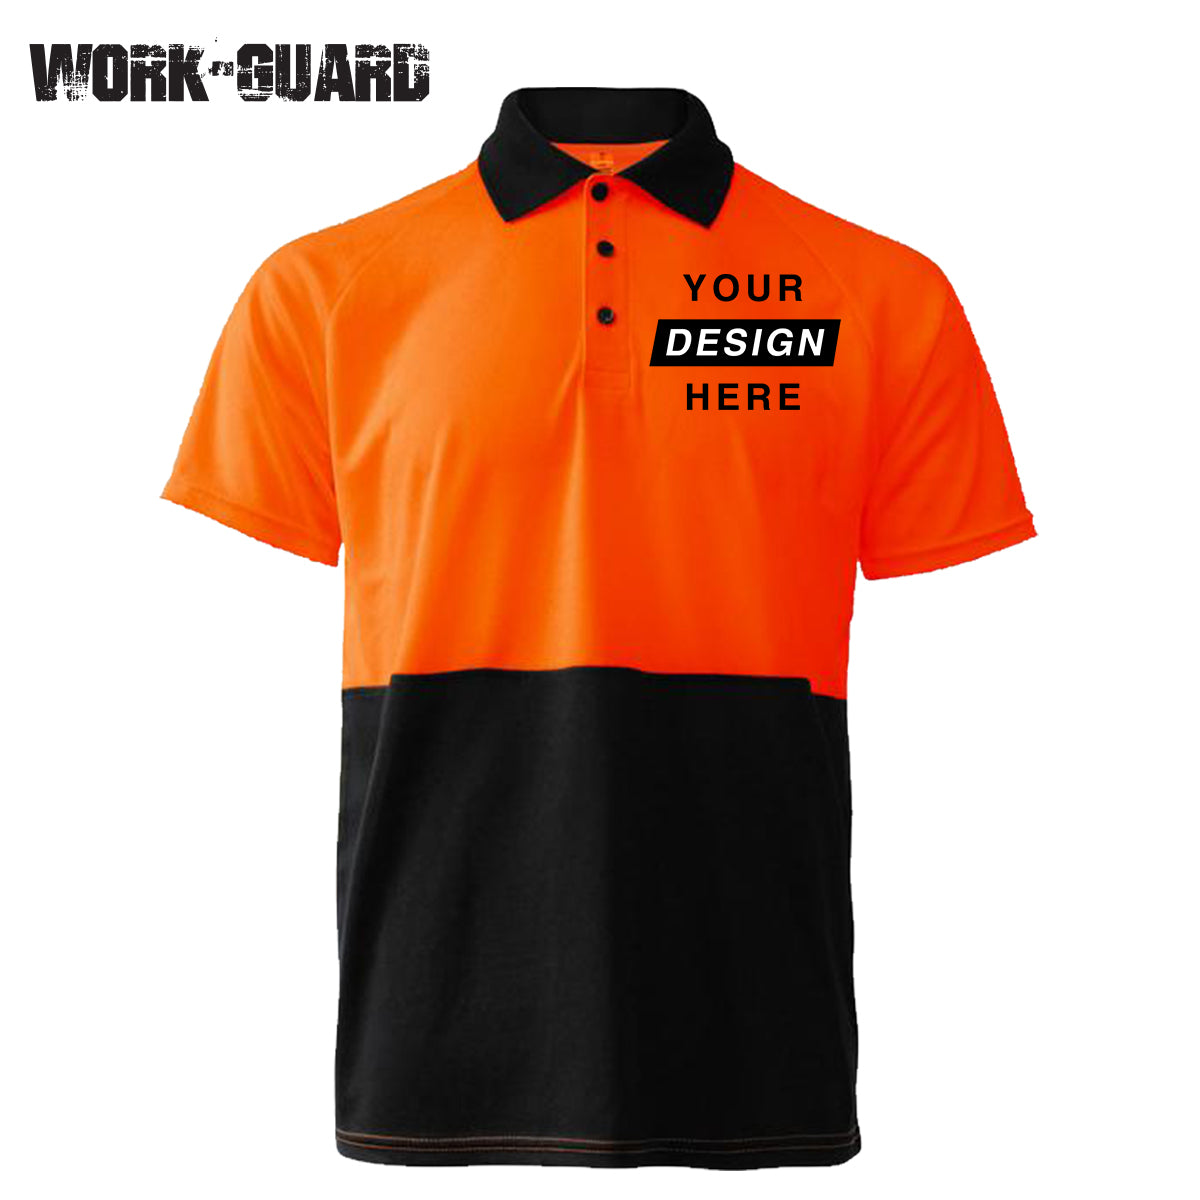 Workguard Polo Shirt - Design Your Own - Front Only